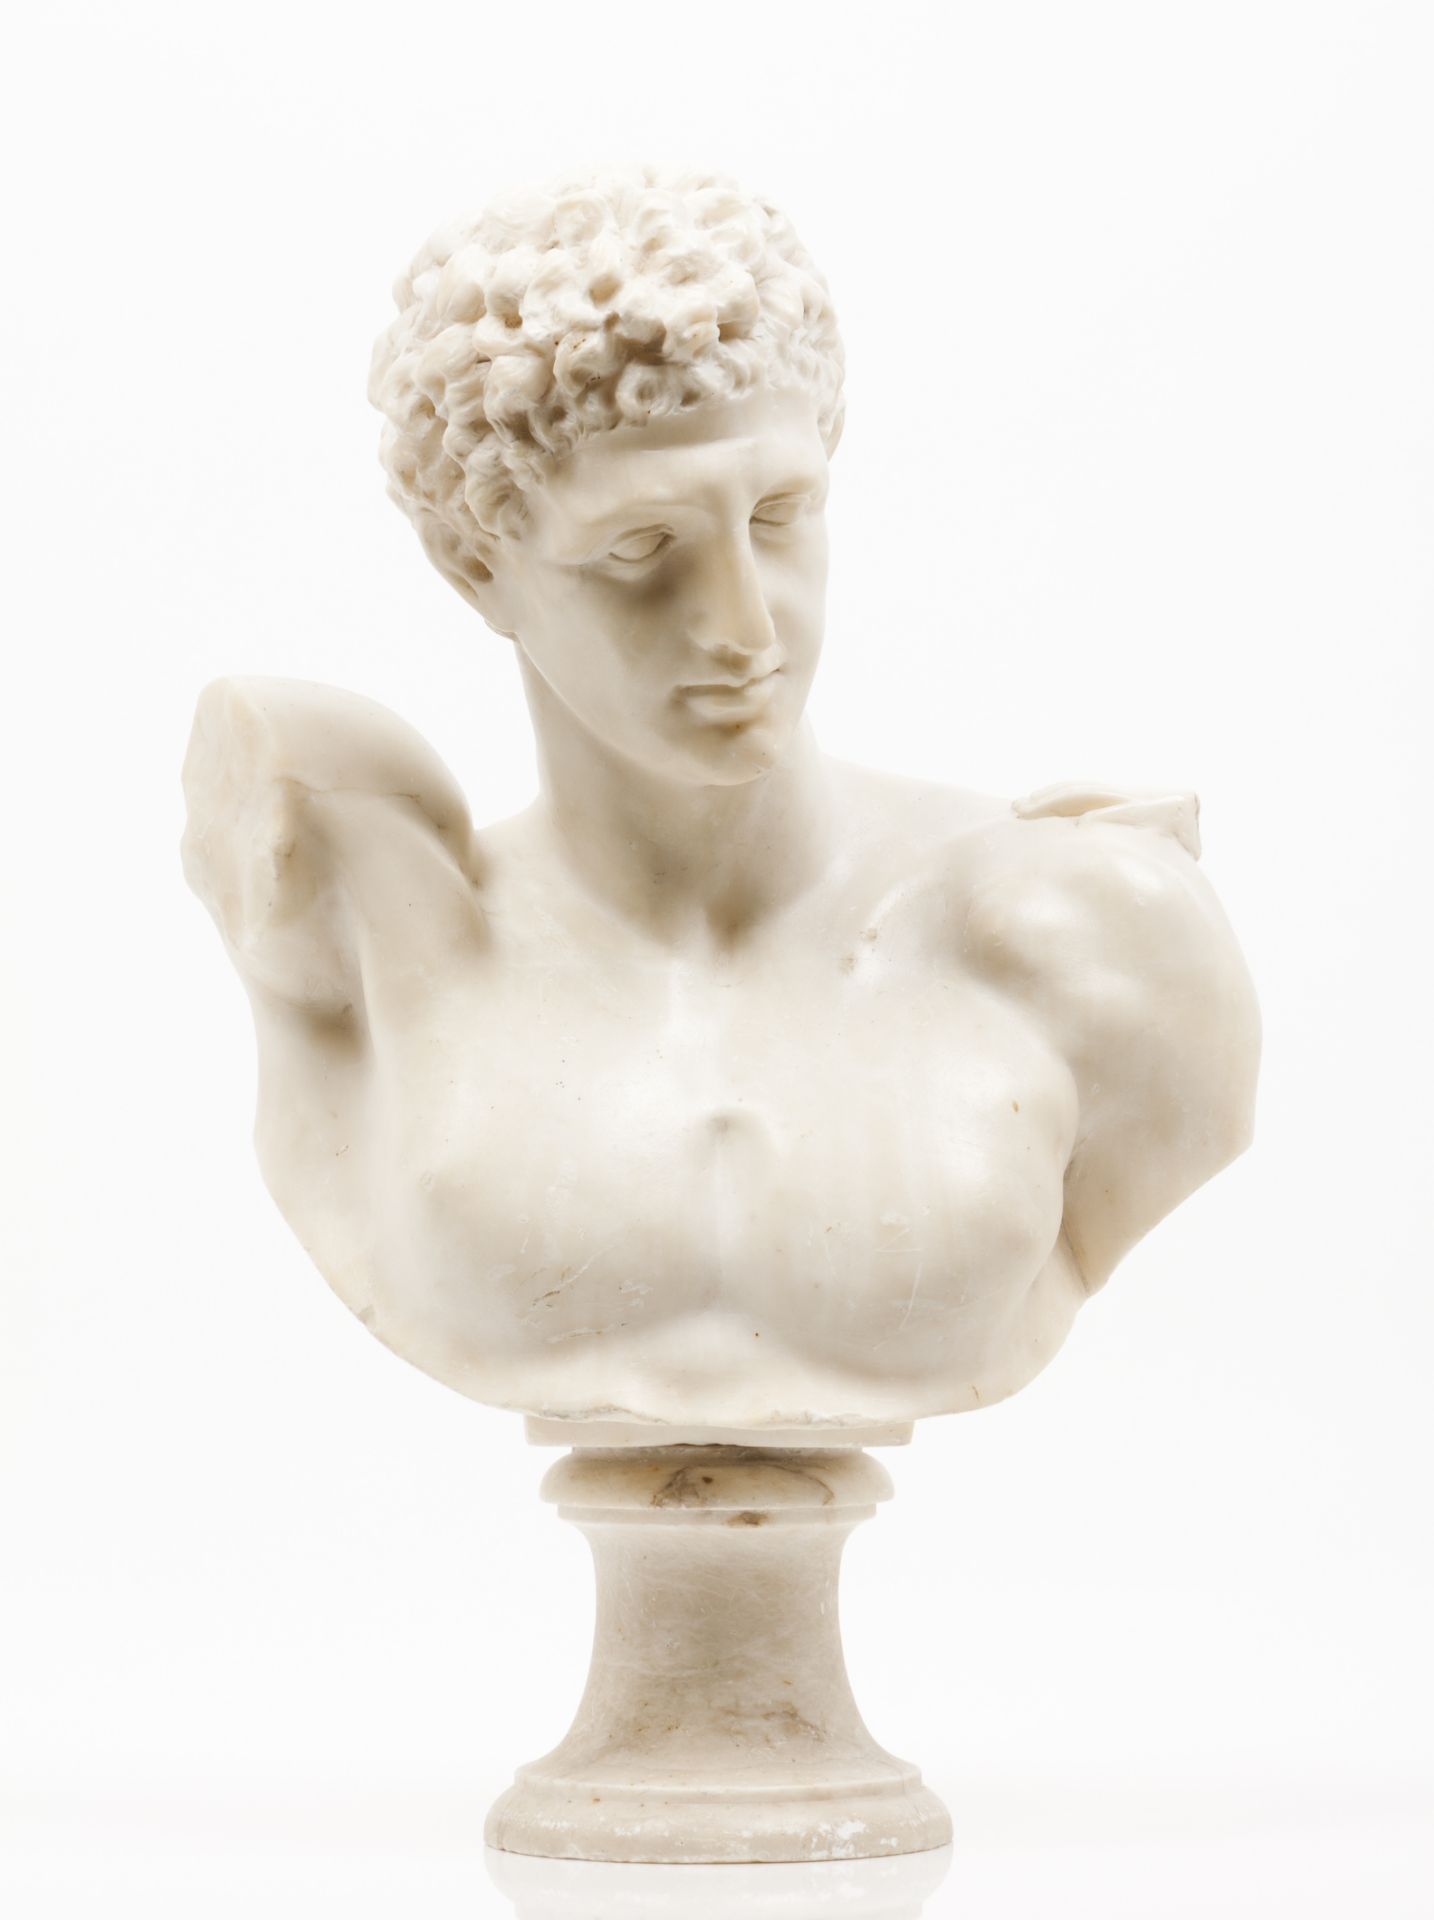 Ephebe's bustWhite marble sculptureEurope, 19th century(losses and faults)Height: 44 cm